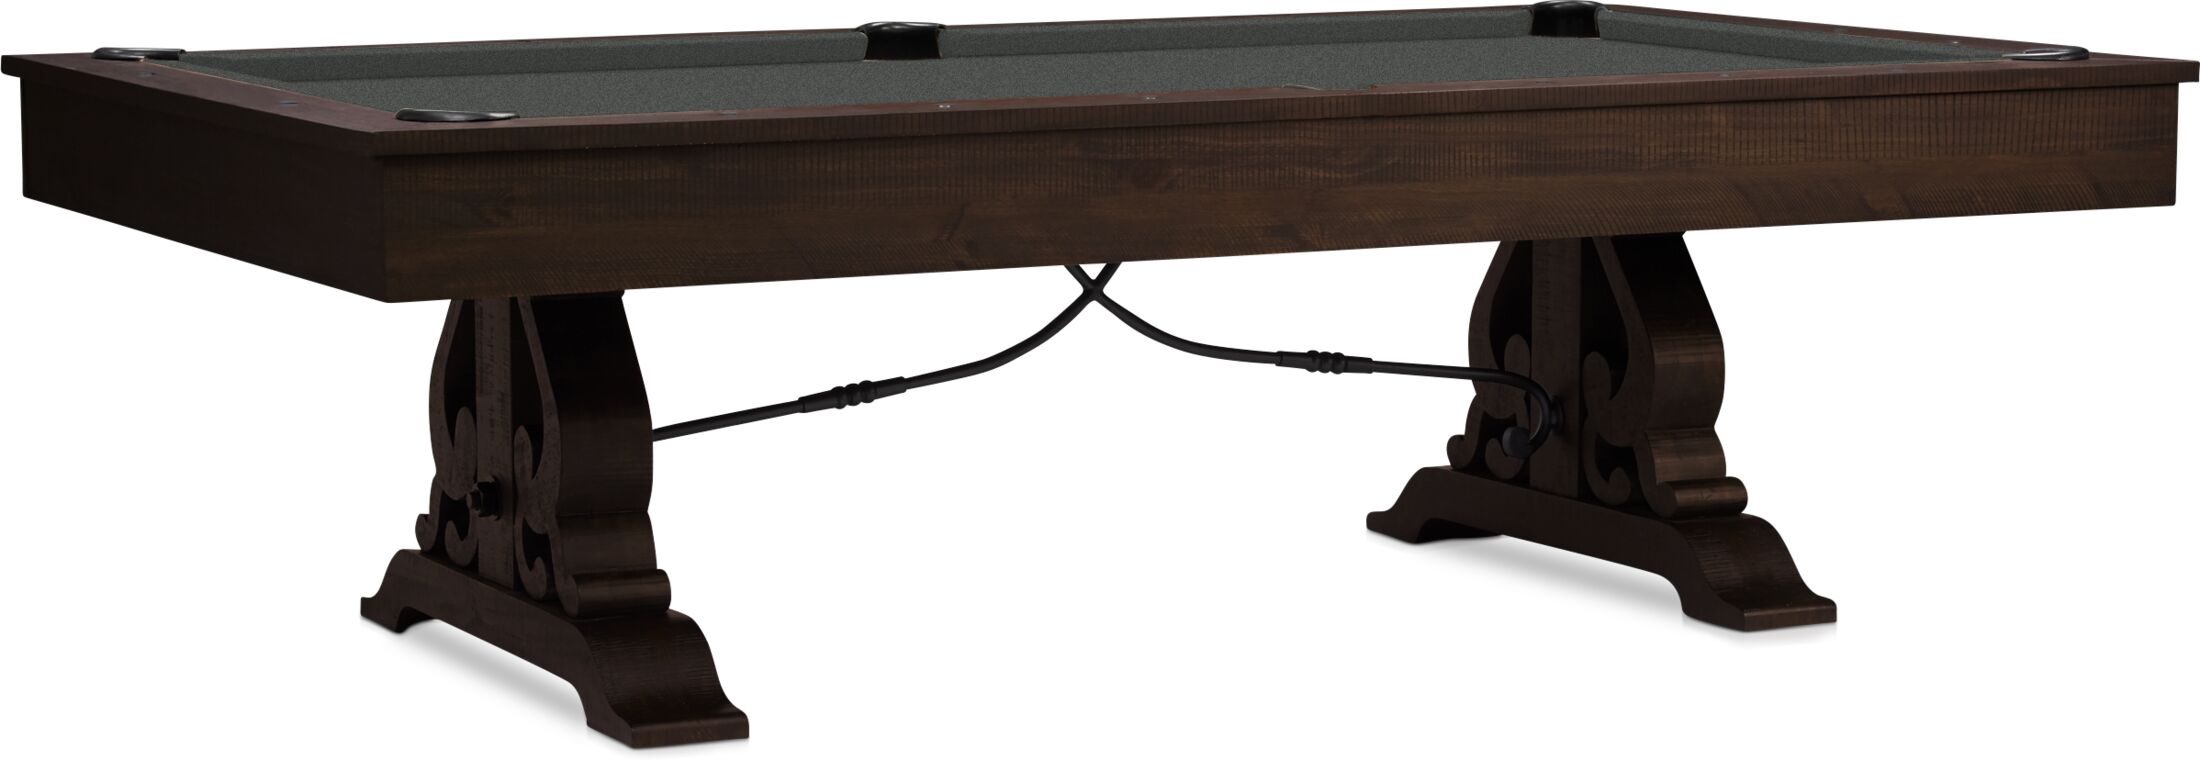 Charthouse Pool Table with Dining Table Top | Value City Furniture